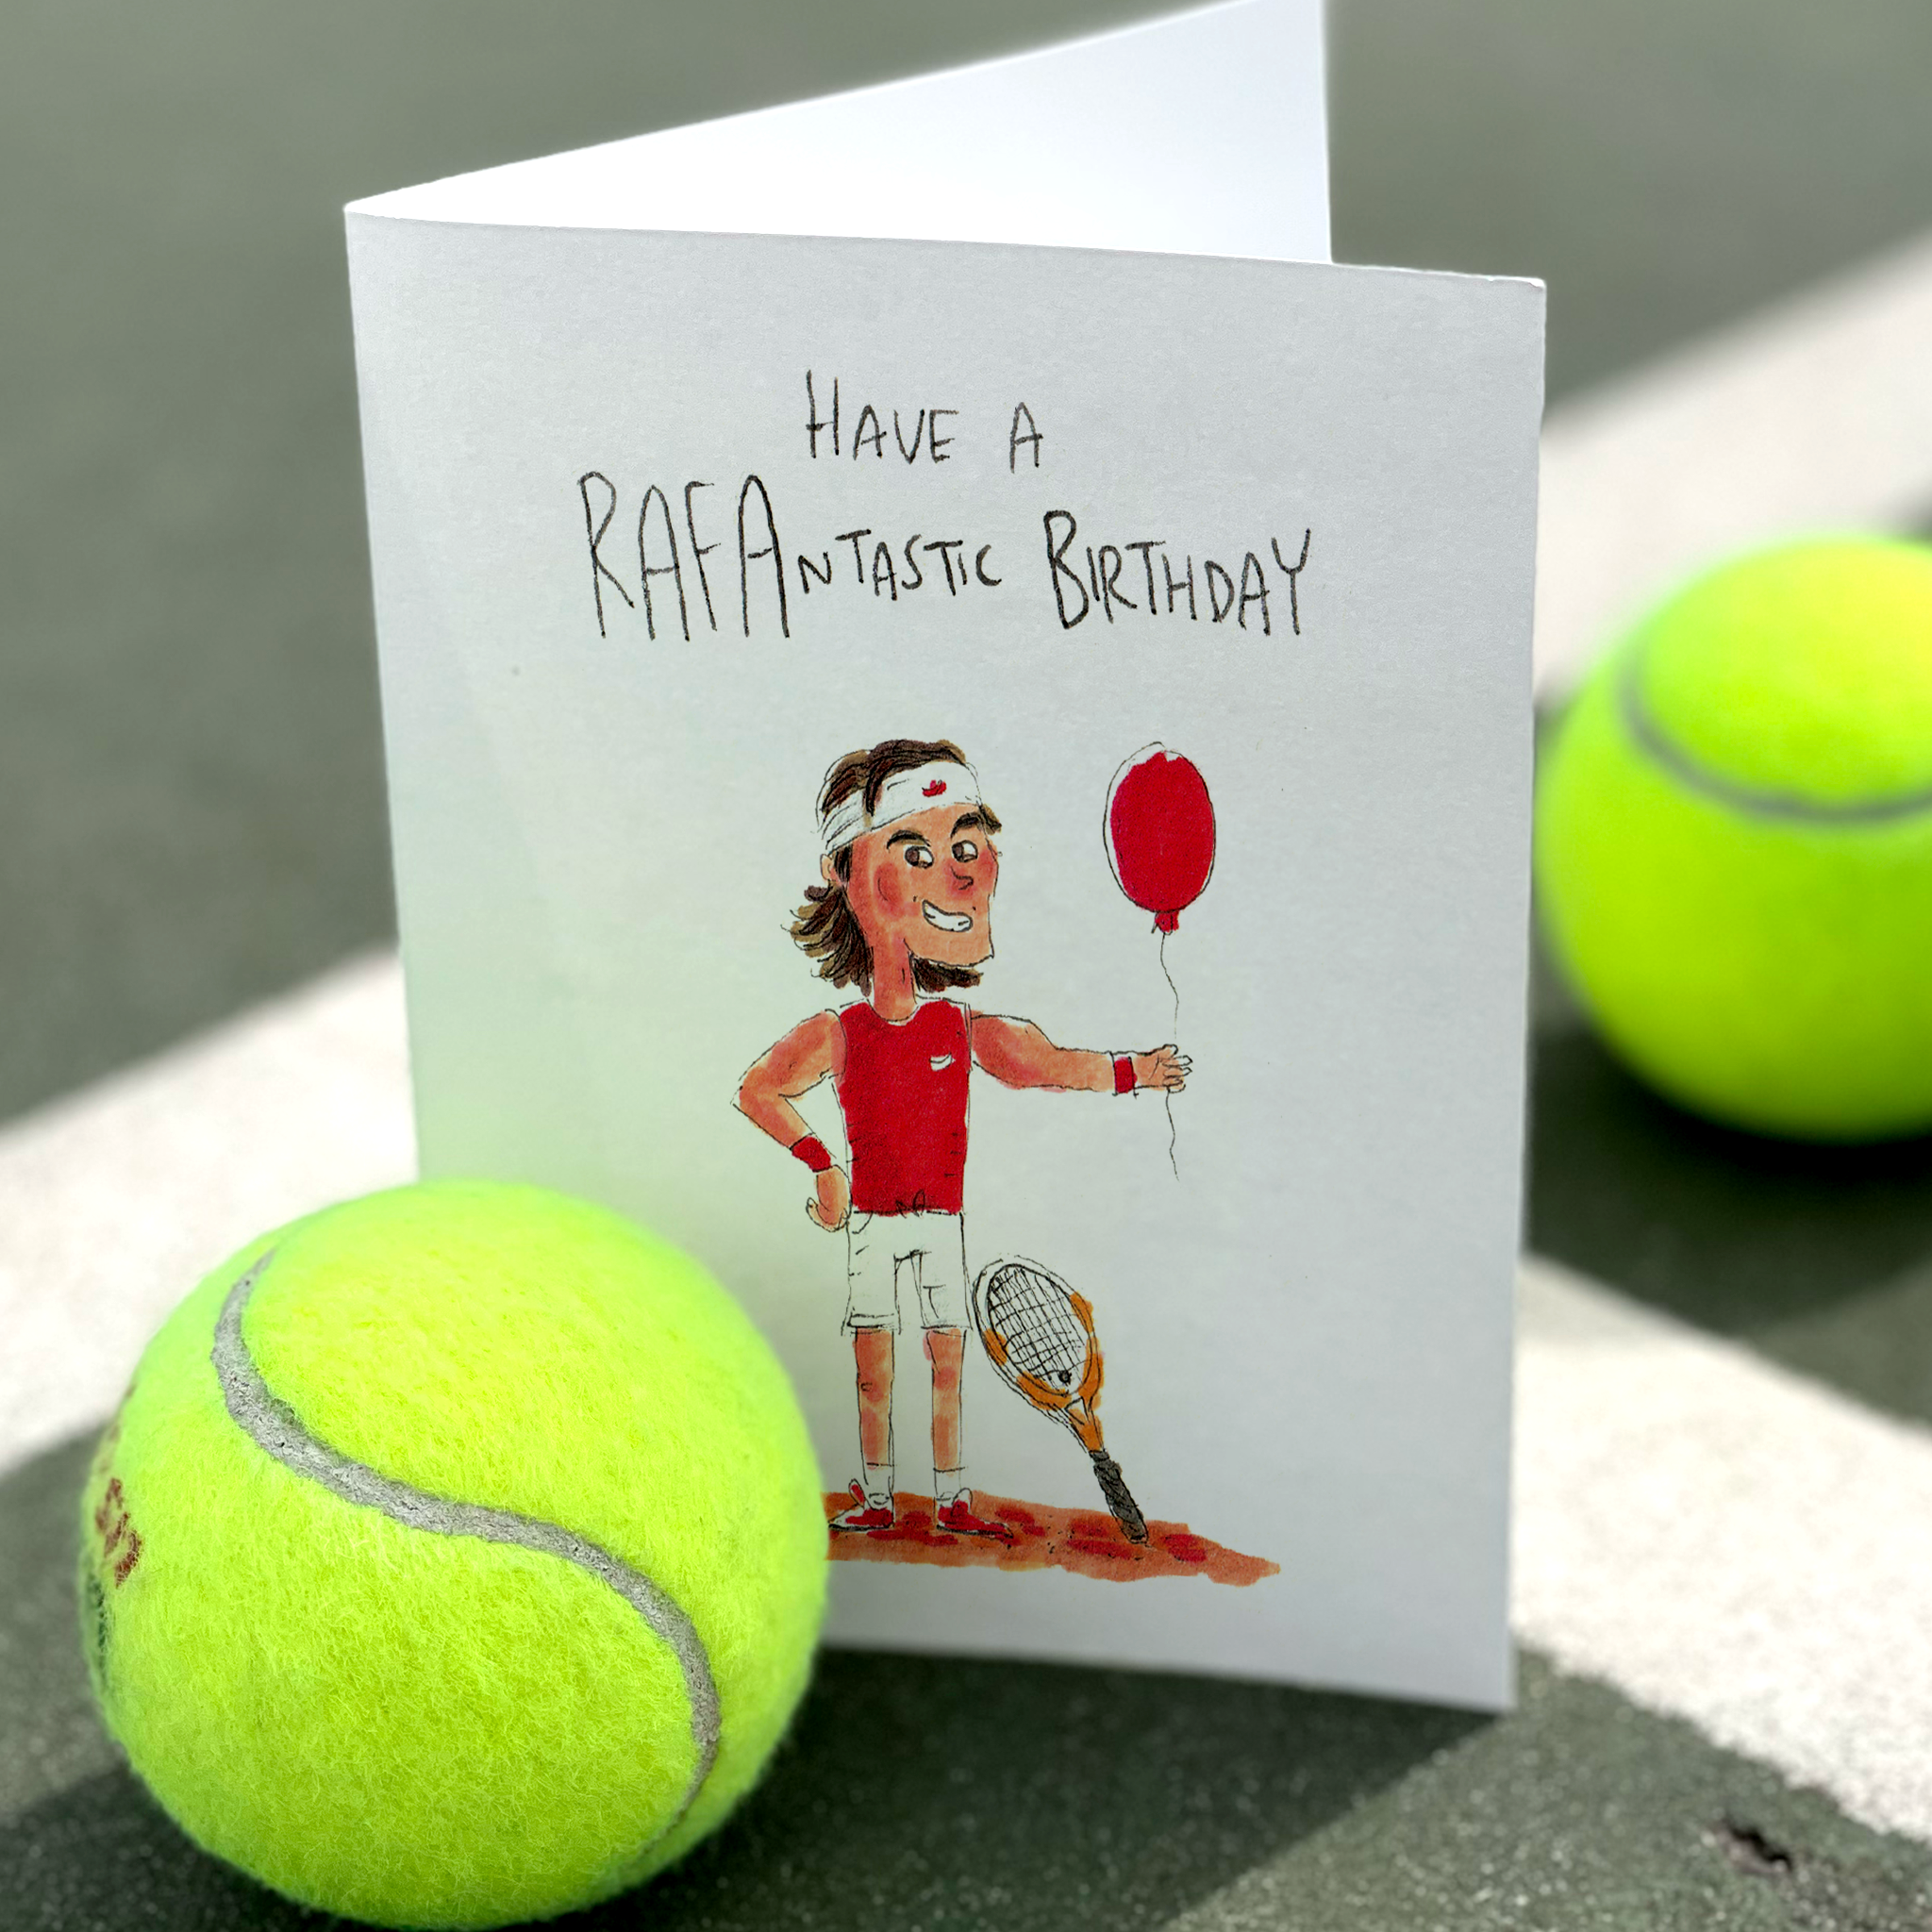 Have a RAFAntastic Birthday - TENNIS FANS collection